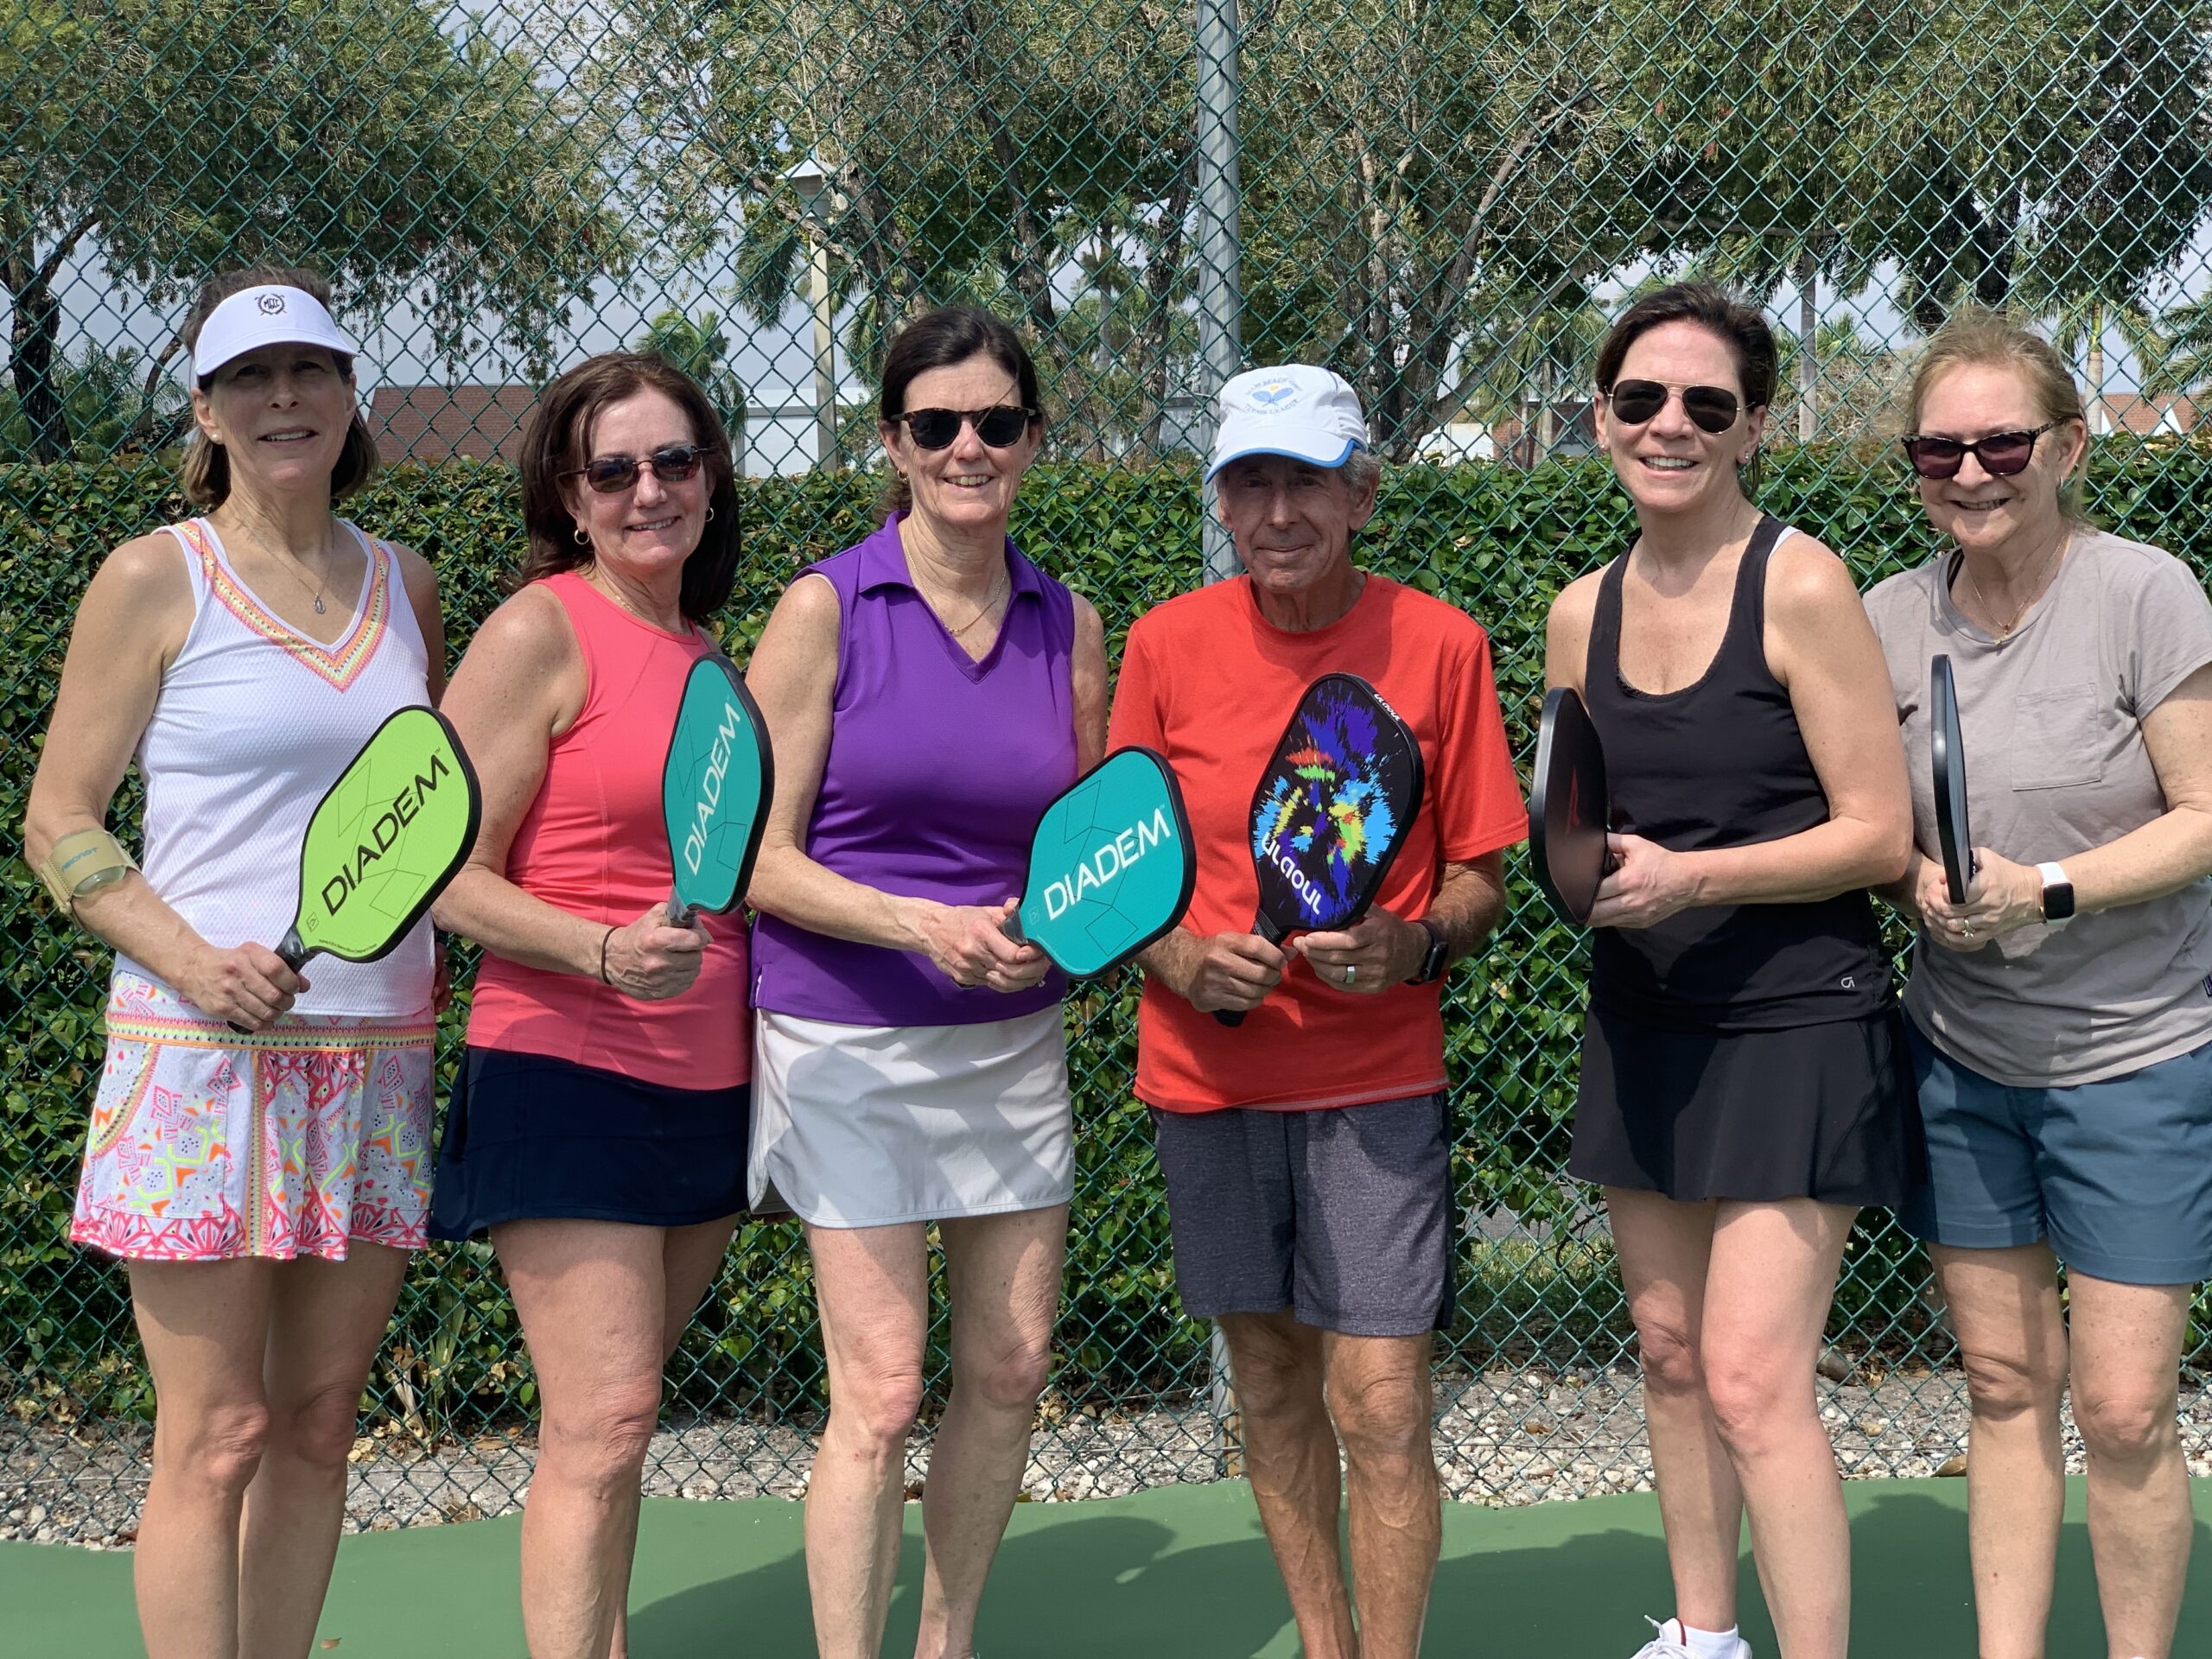 What to do while on vacation in Florida? Play pickleball! Bob with Erika and her friends after a spirited lesson and game in Delray Beach, FL.